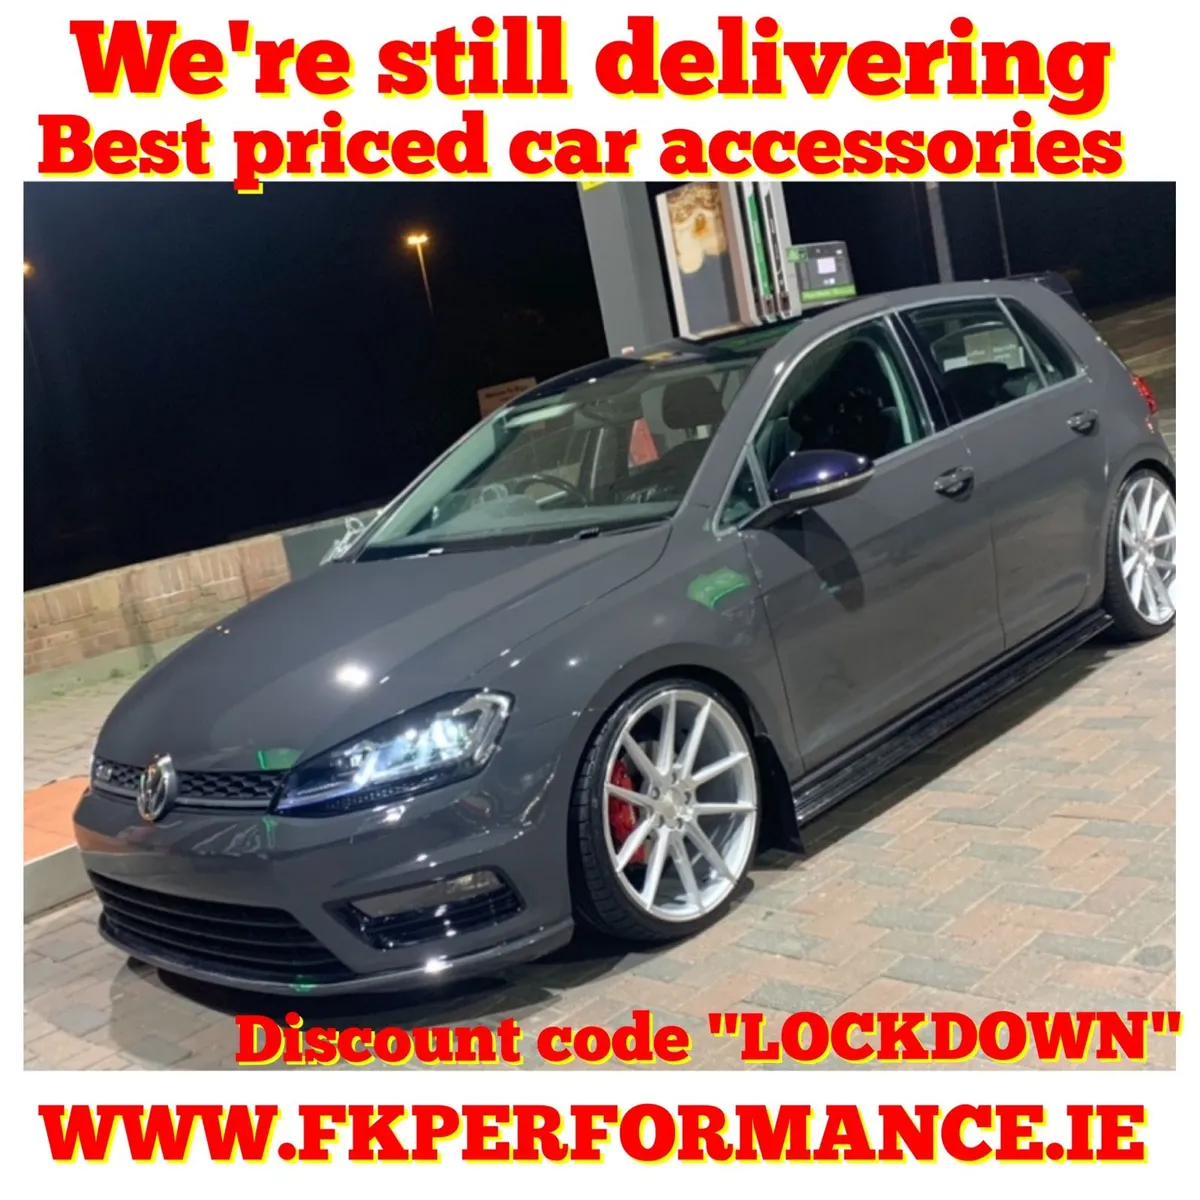 Upgrade to Coilover suspension at FK performance